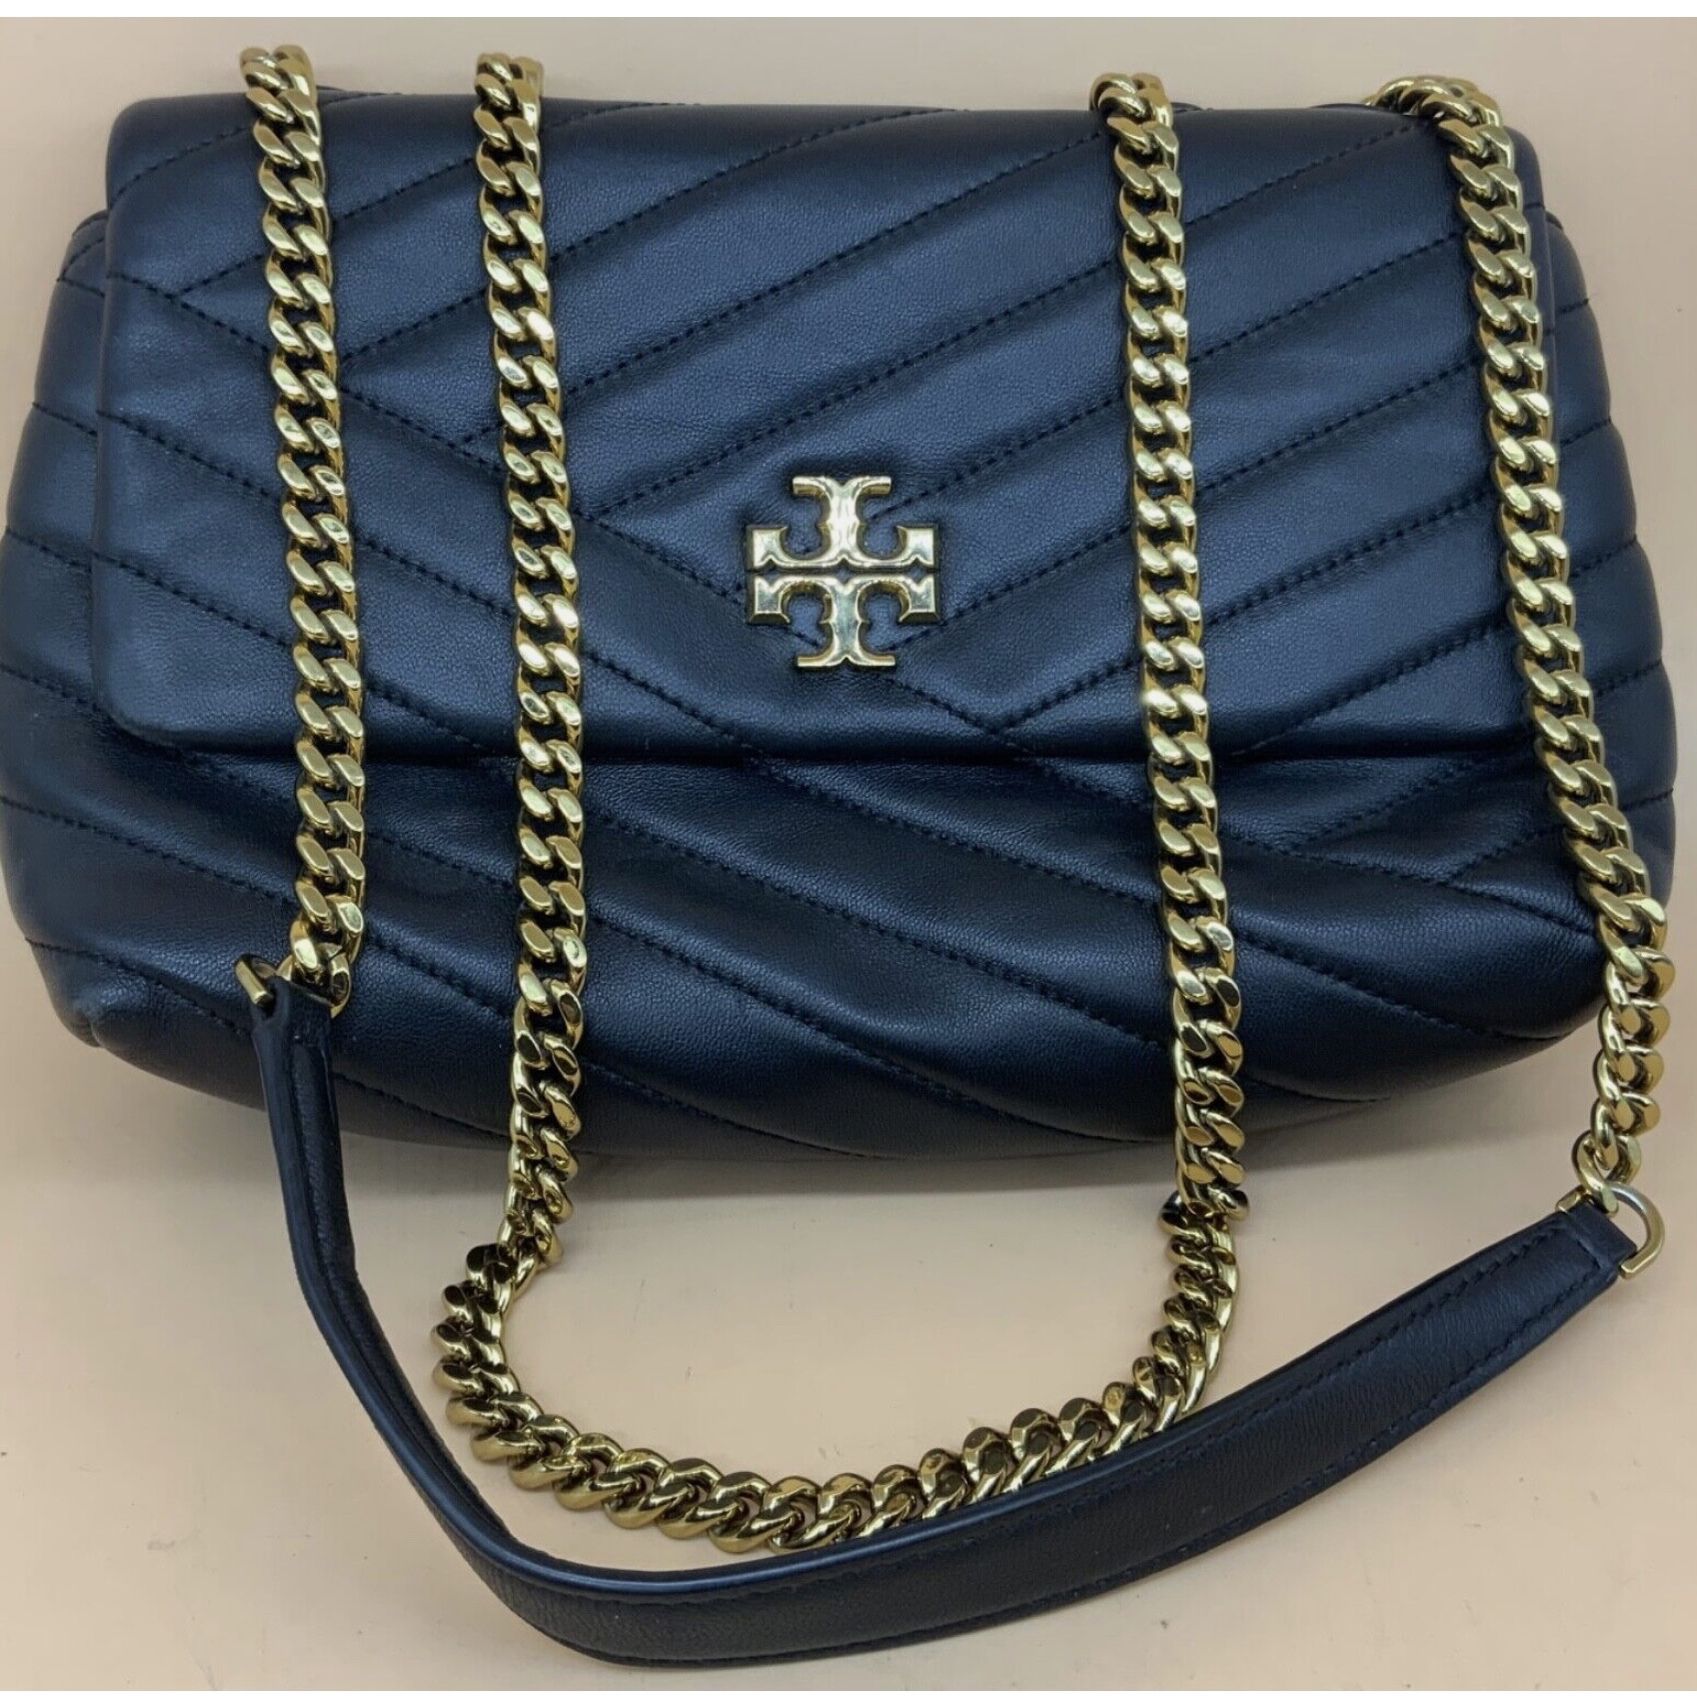 Tory Burch Kira Chevron Convertible Fashion Quilted Small Leather Shoulder Bag